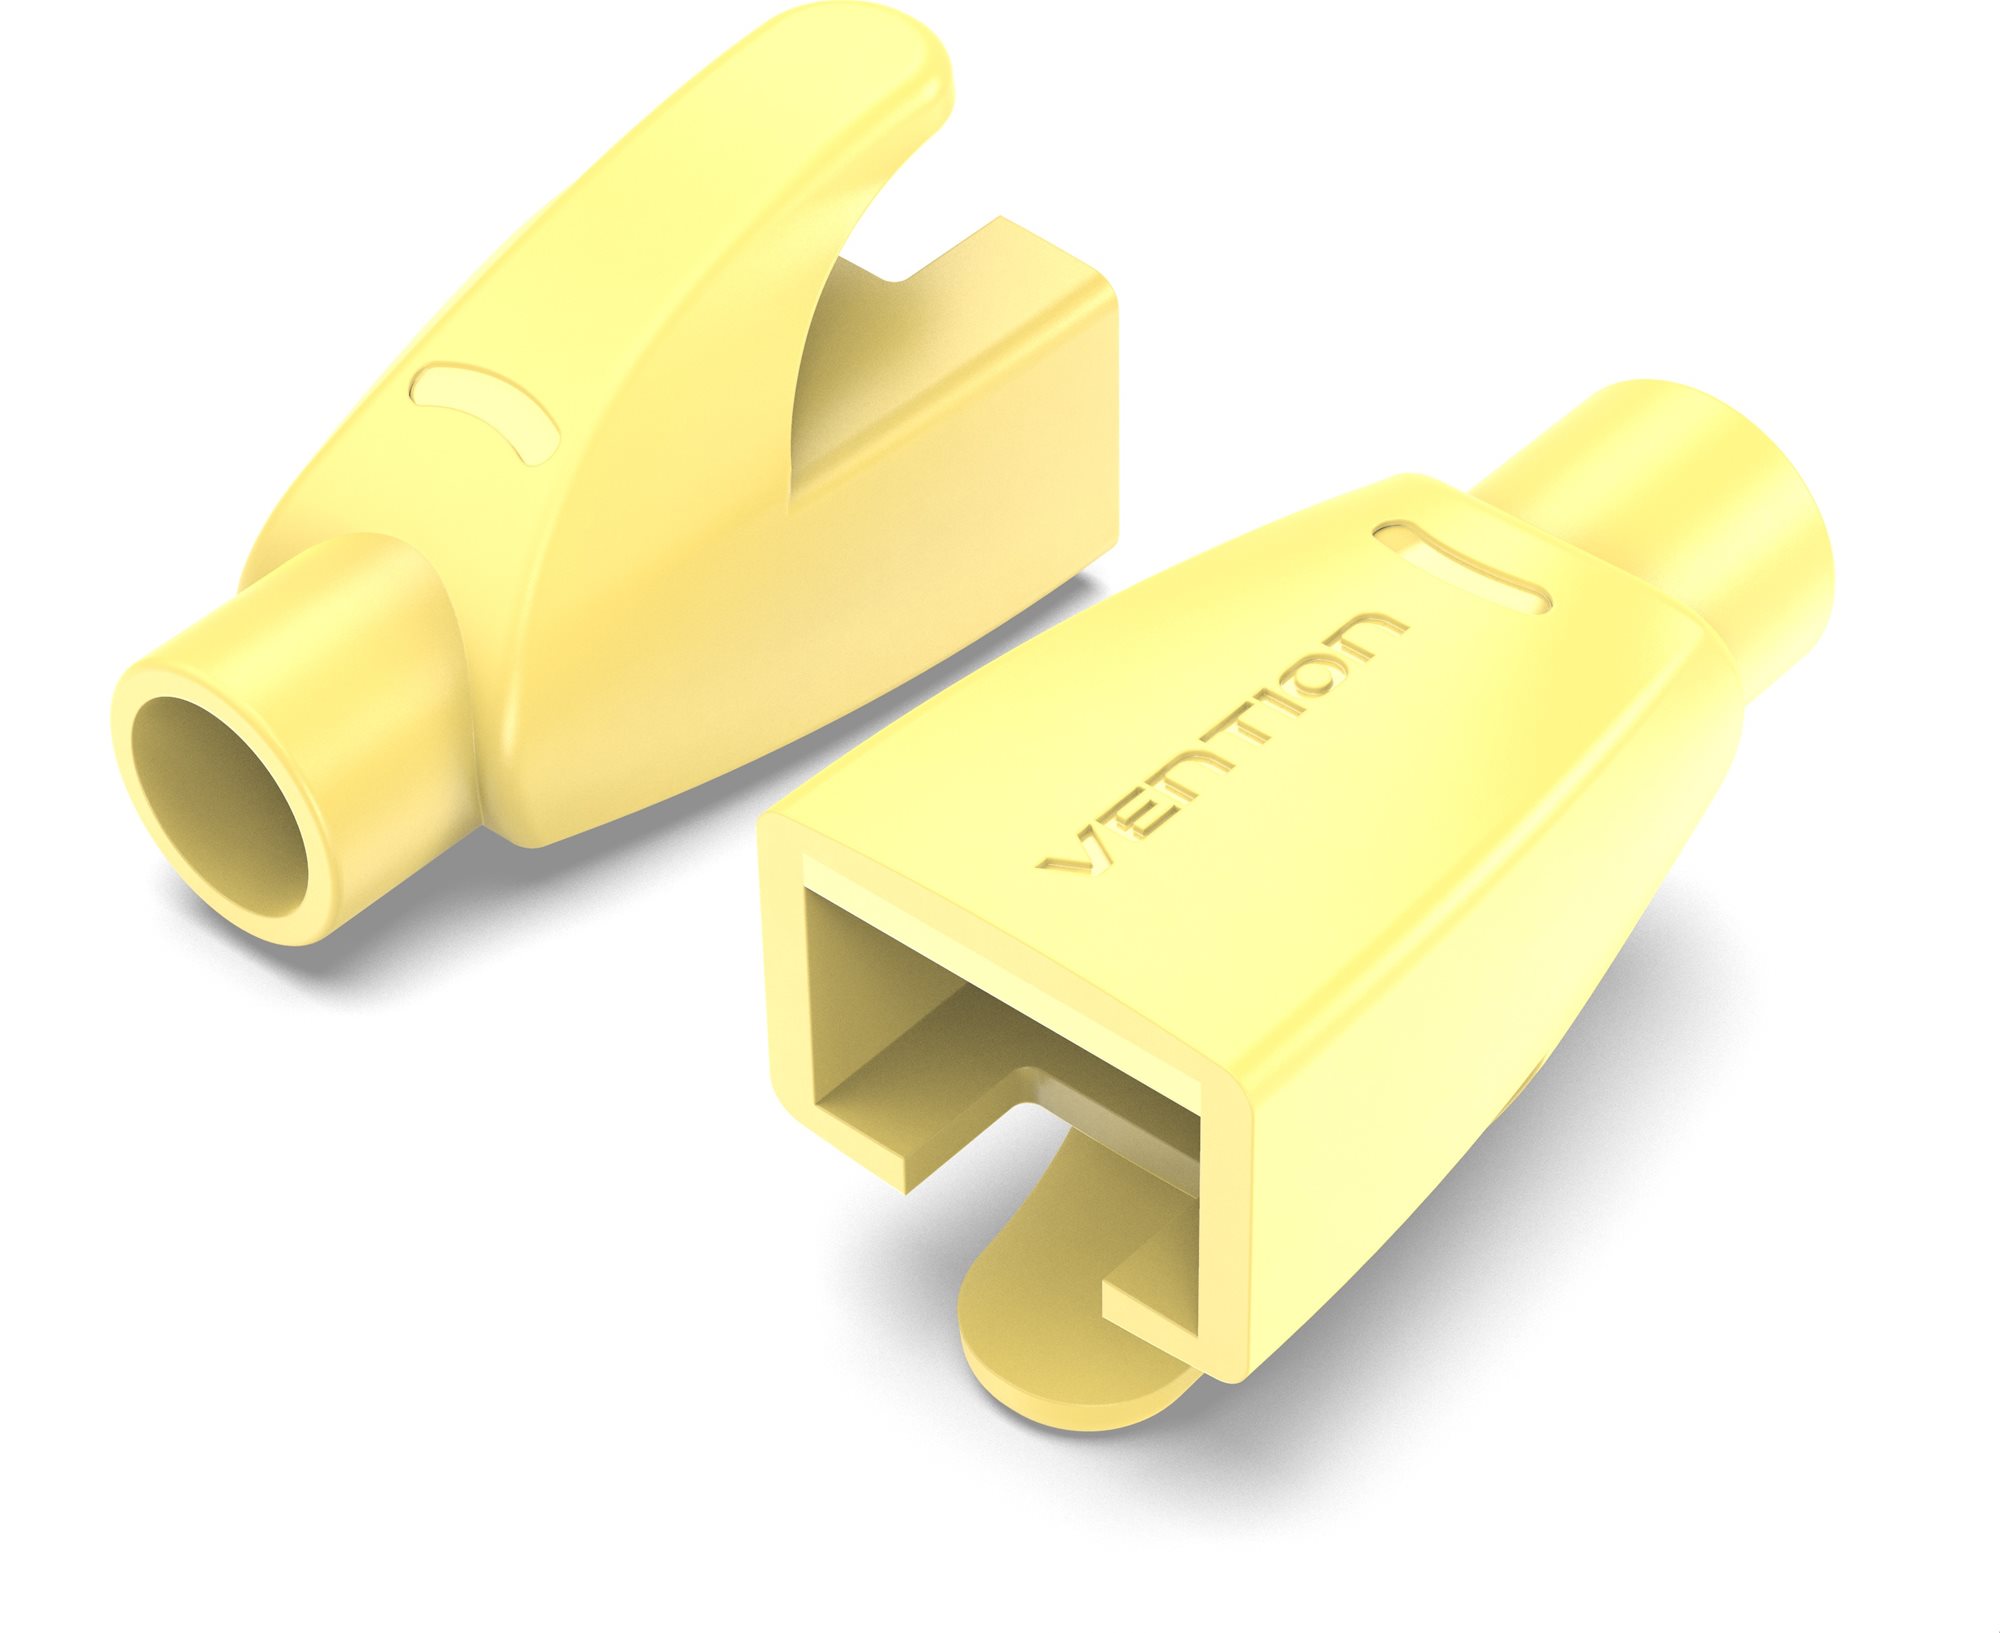 Vention RJ45 Strain Relief Boots Yellow PVC Type 100 Pack